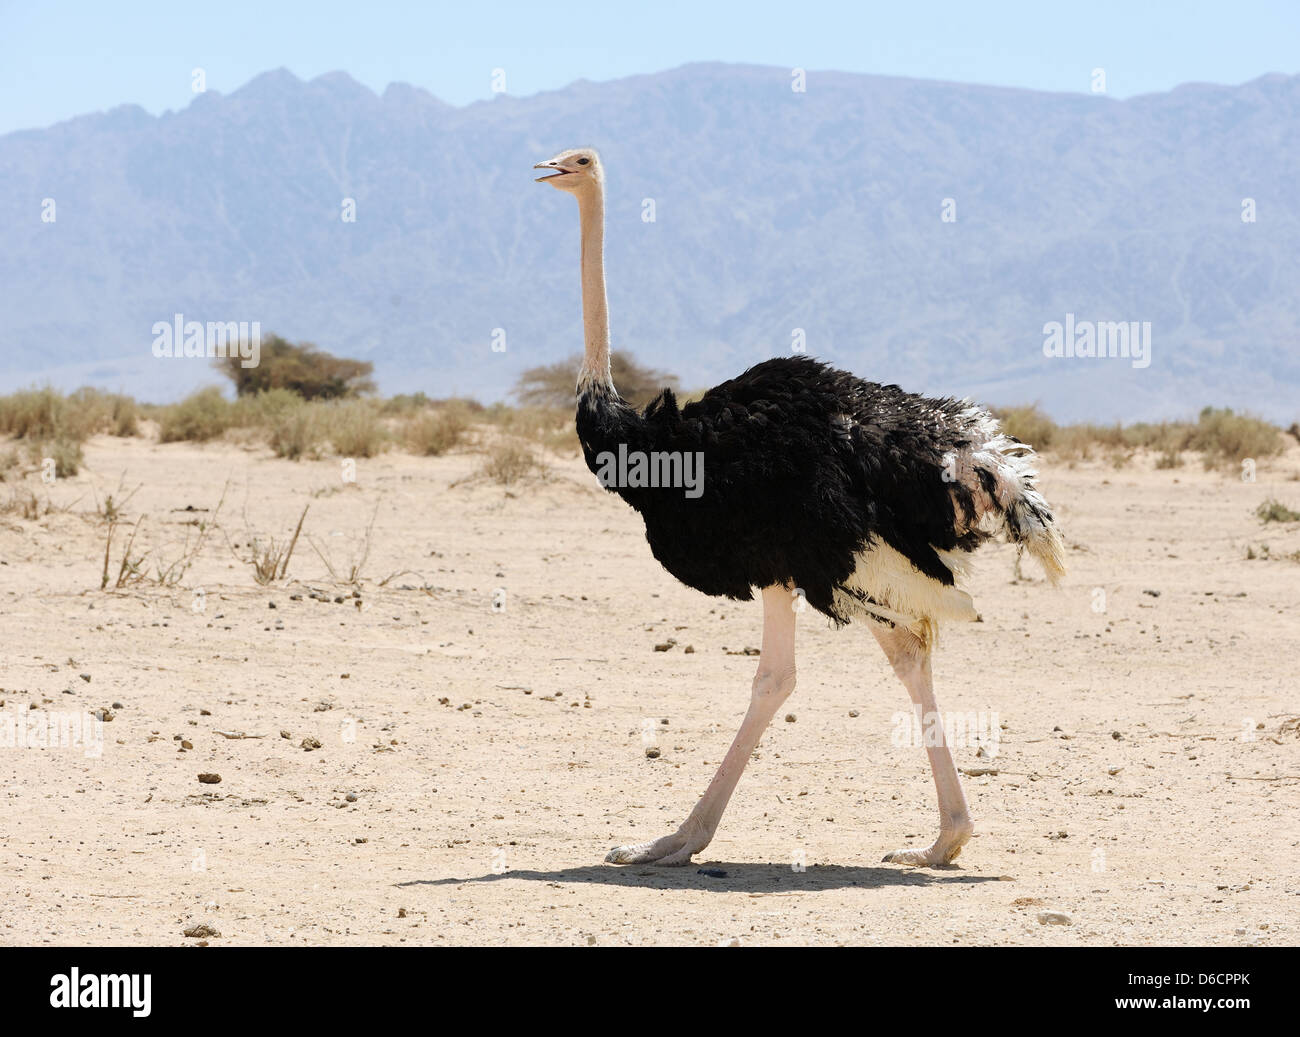 African ostrich Stock Photo